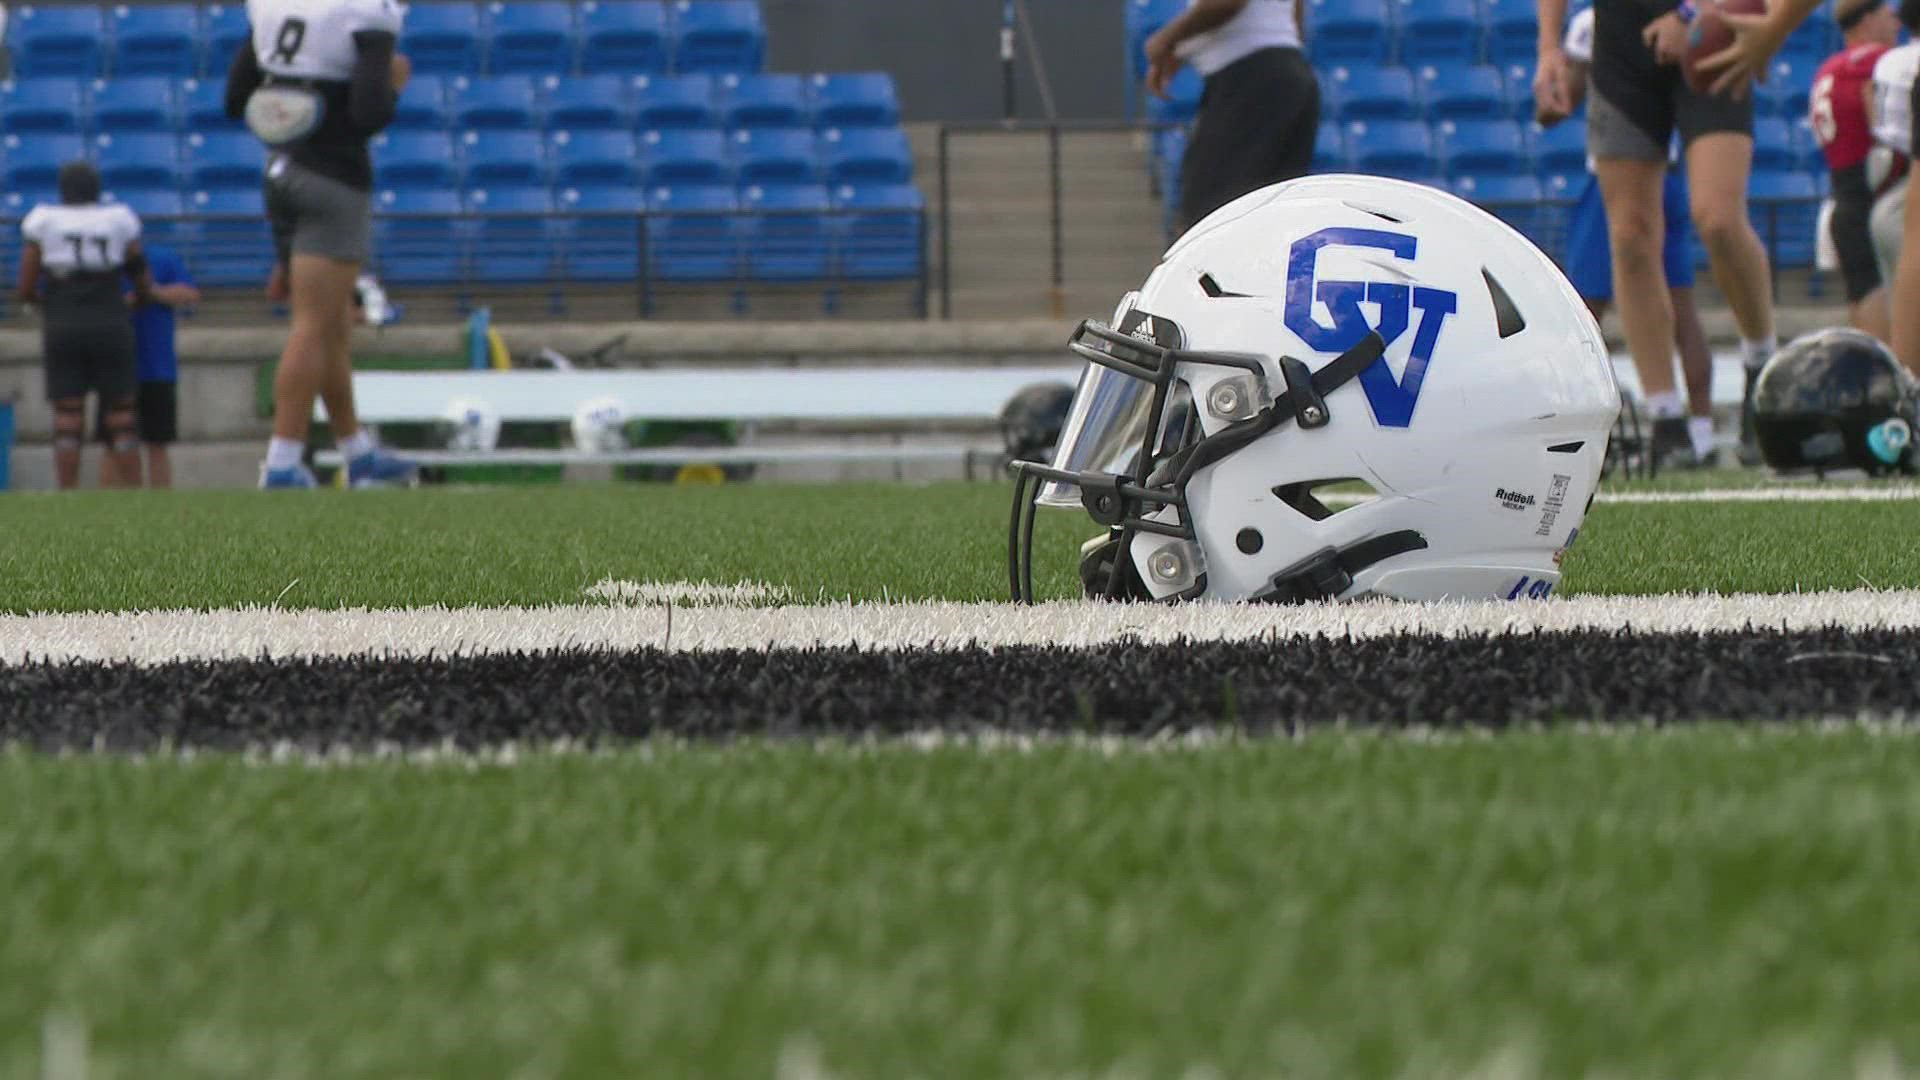 The Grand Valley State football team is finally ready to return to the field this weekend in their season opener.